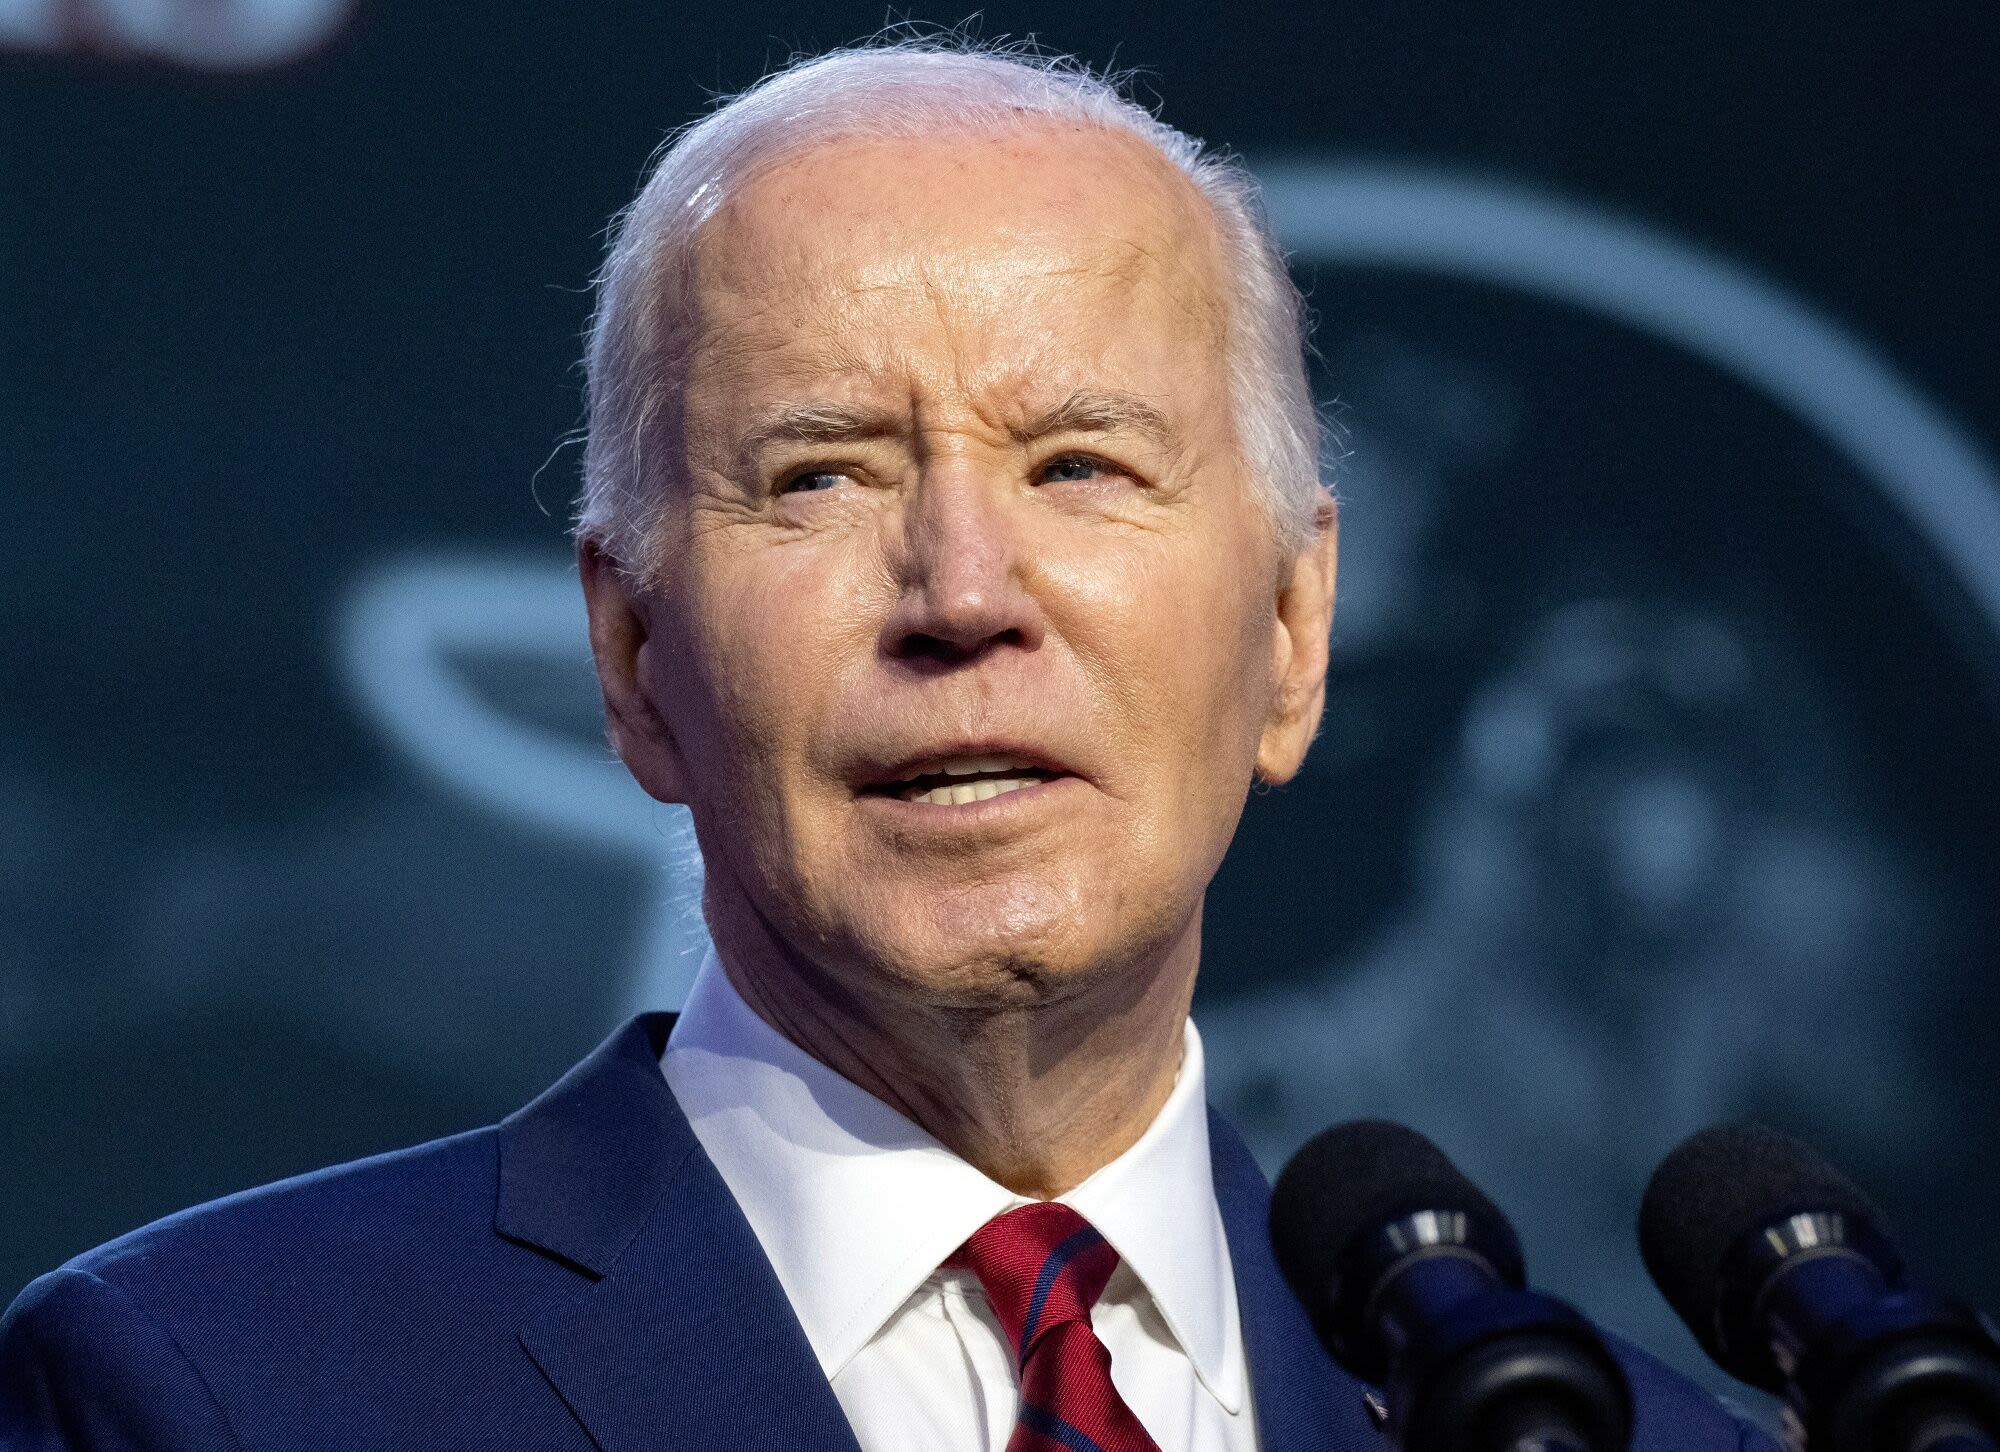 Biden Taunts Trump by Joining Microsoft Chief at Wisconsin Site